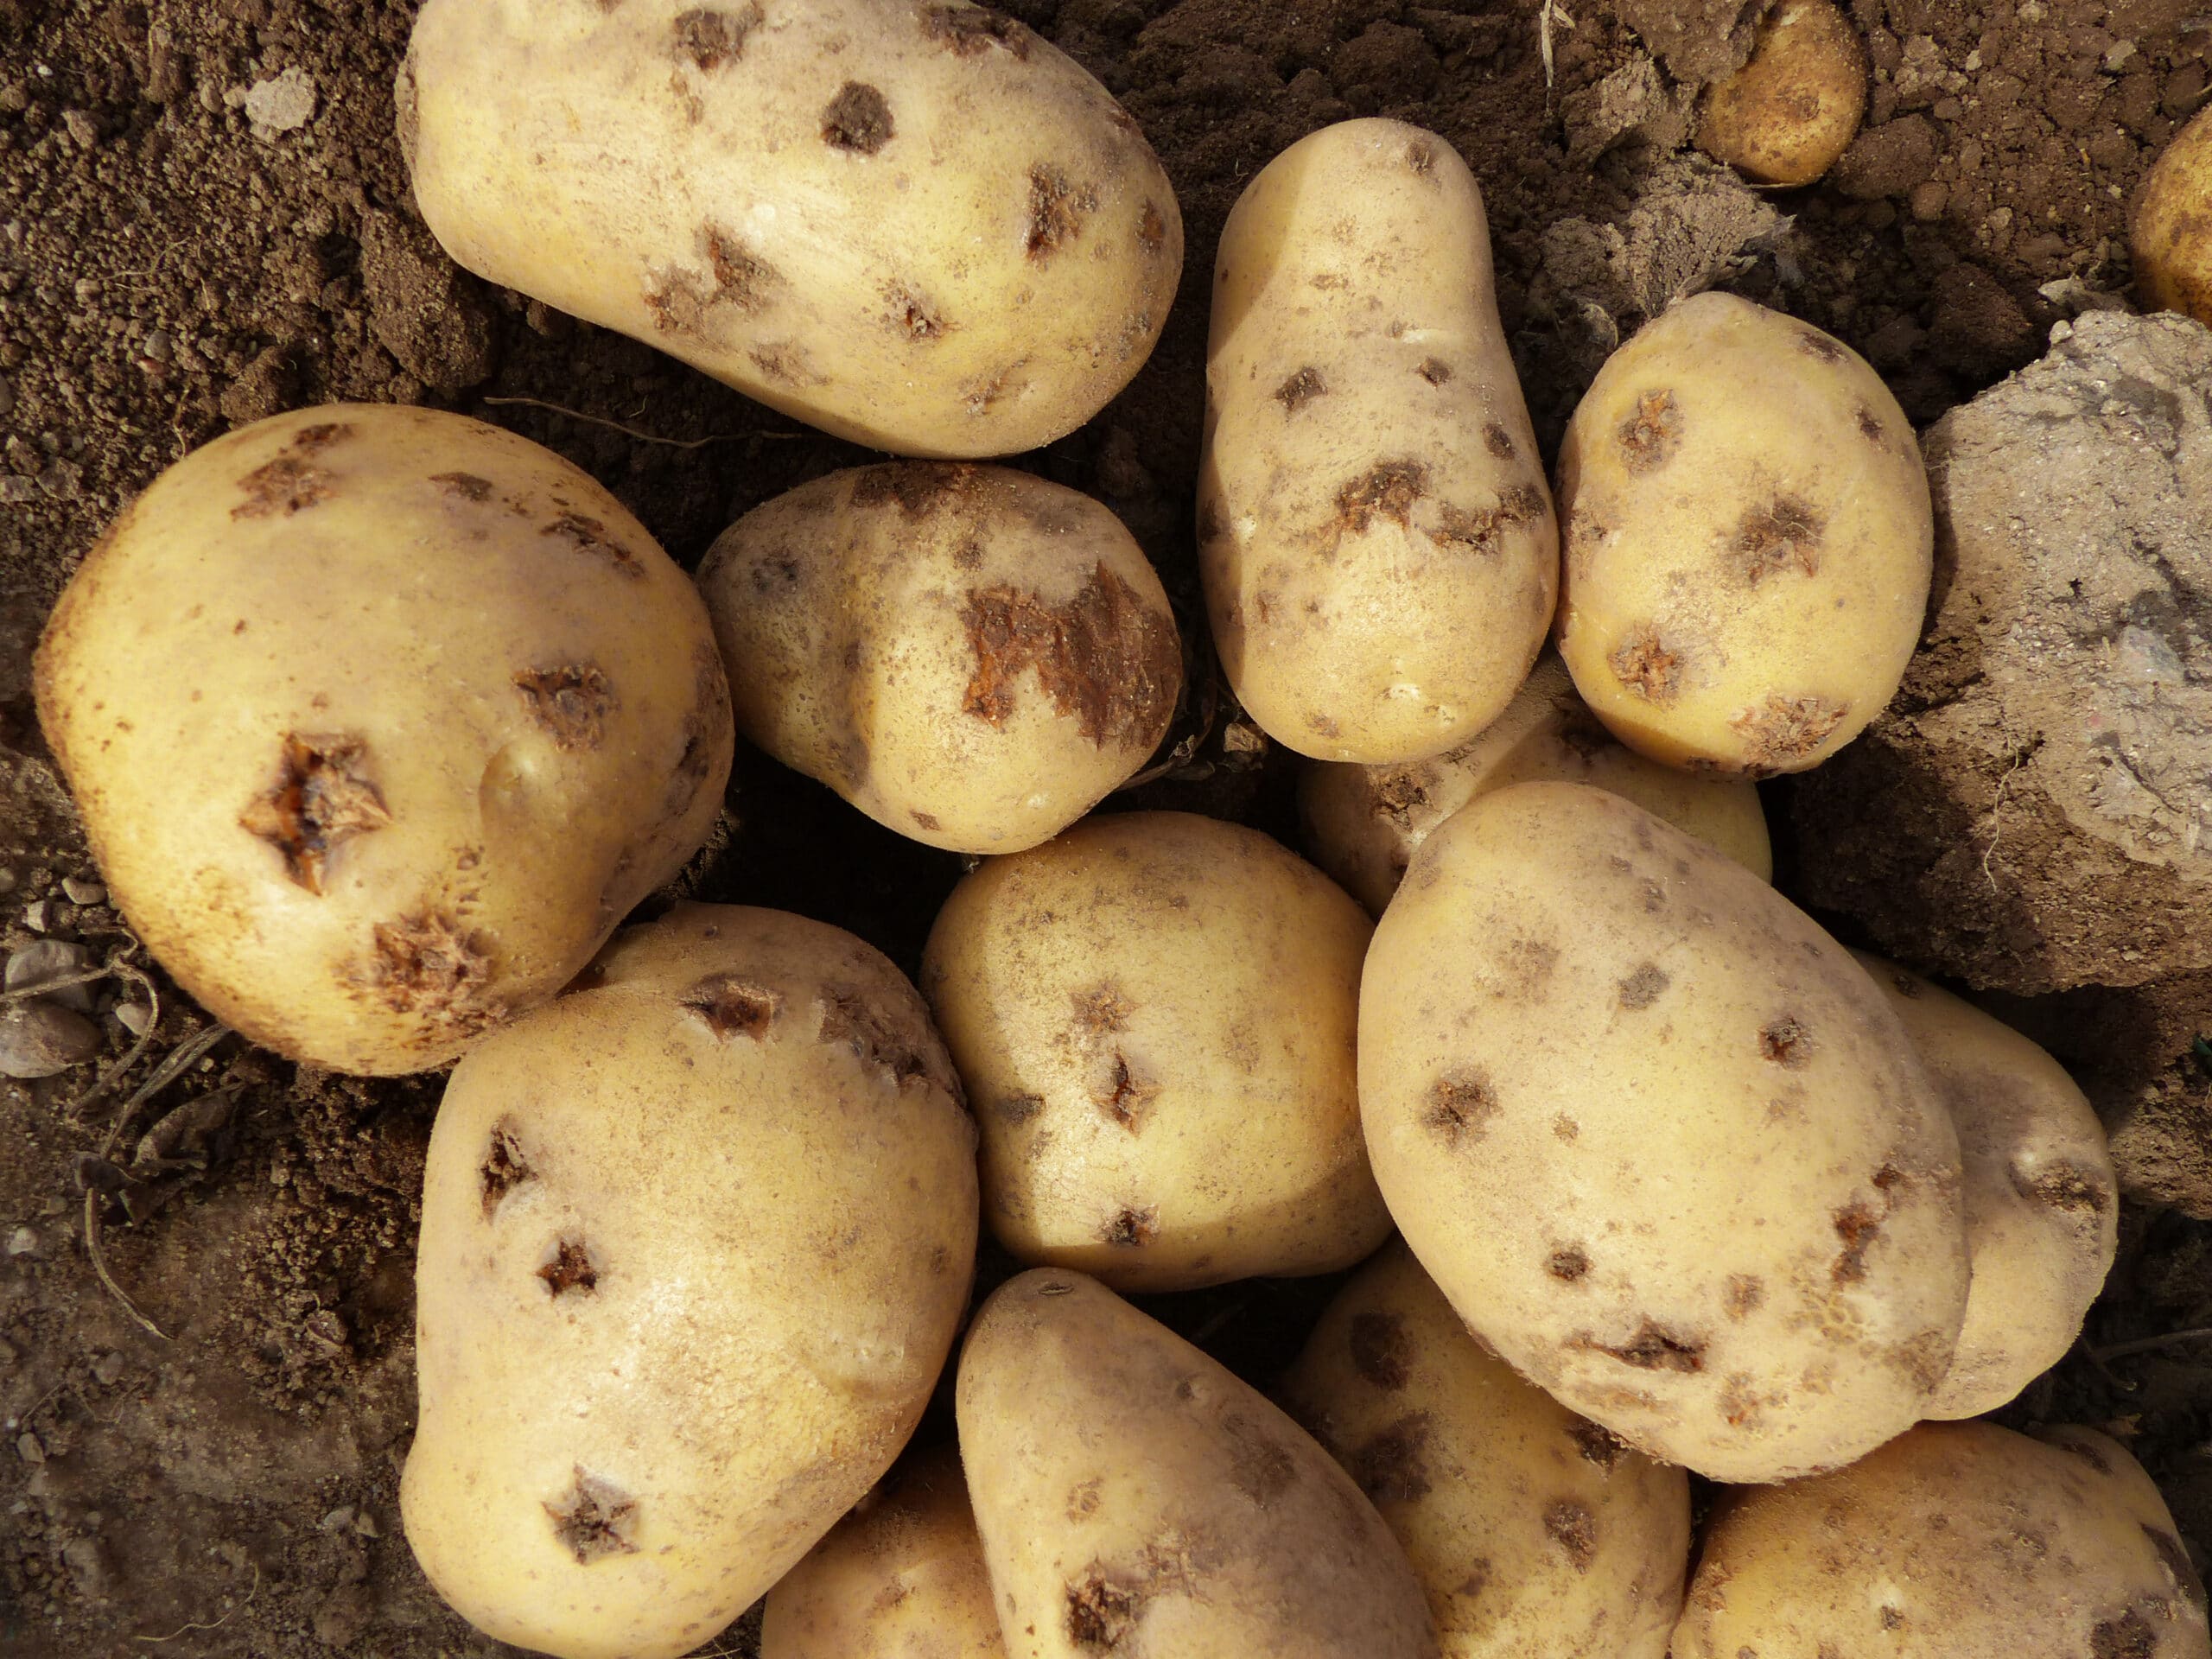 Potato variety susceptible to common scab